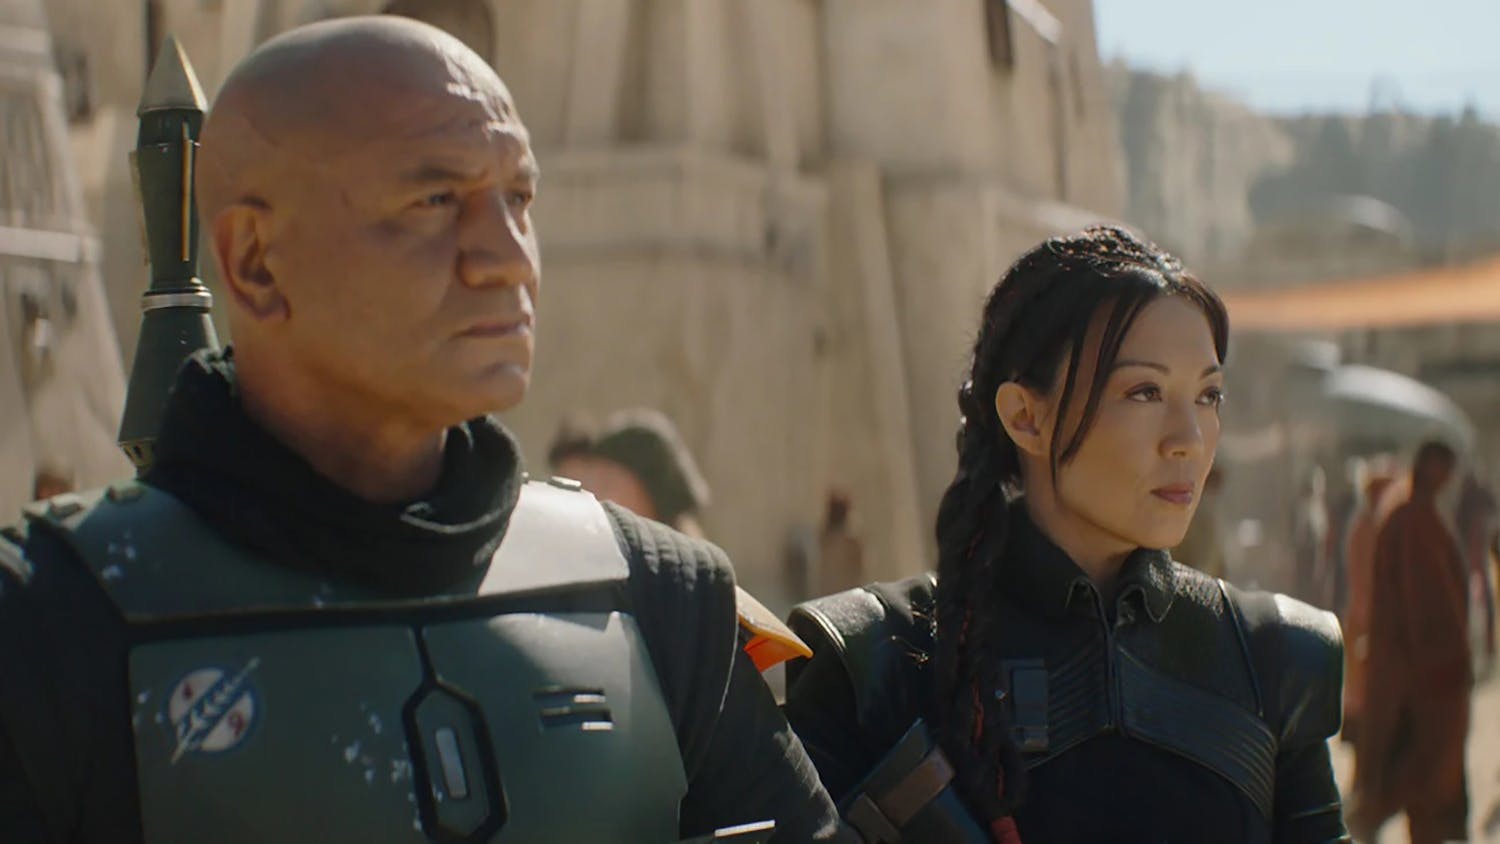 “The Book of Boba Fett” stars Temeura Morrison (left) as the titular bounty hunter and Ming-Na Wen (“Agents of S.H.I.E.L.D.”) as Fennec Shand. (Lucasfilm Ltd./Disney+/TNS)